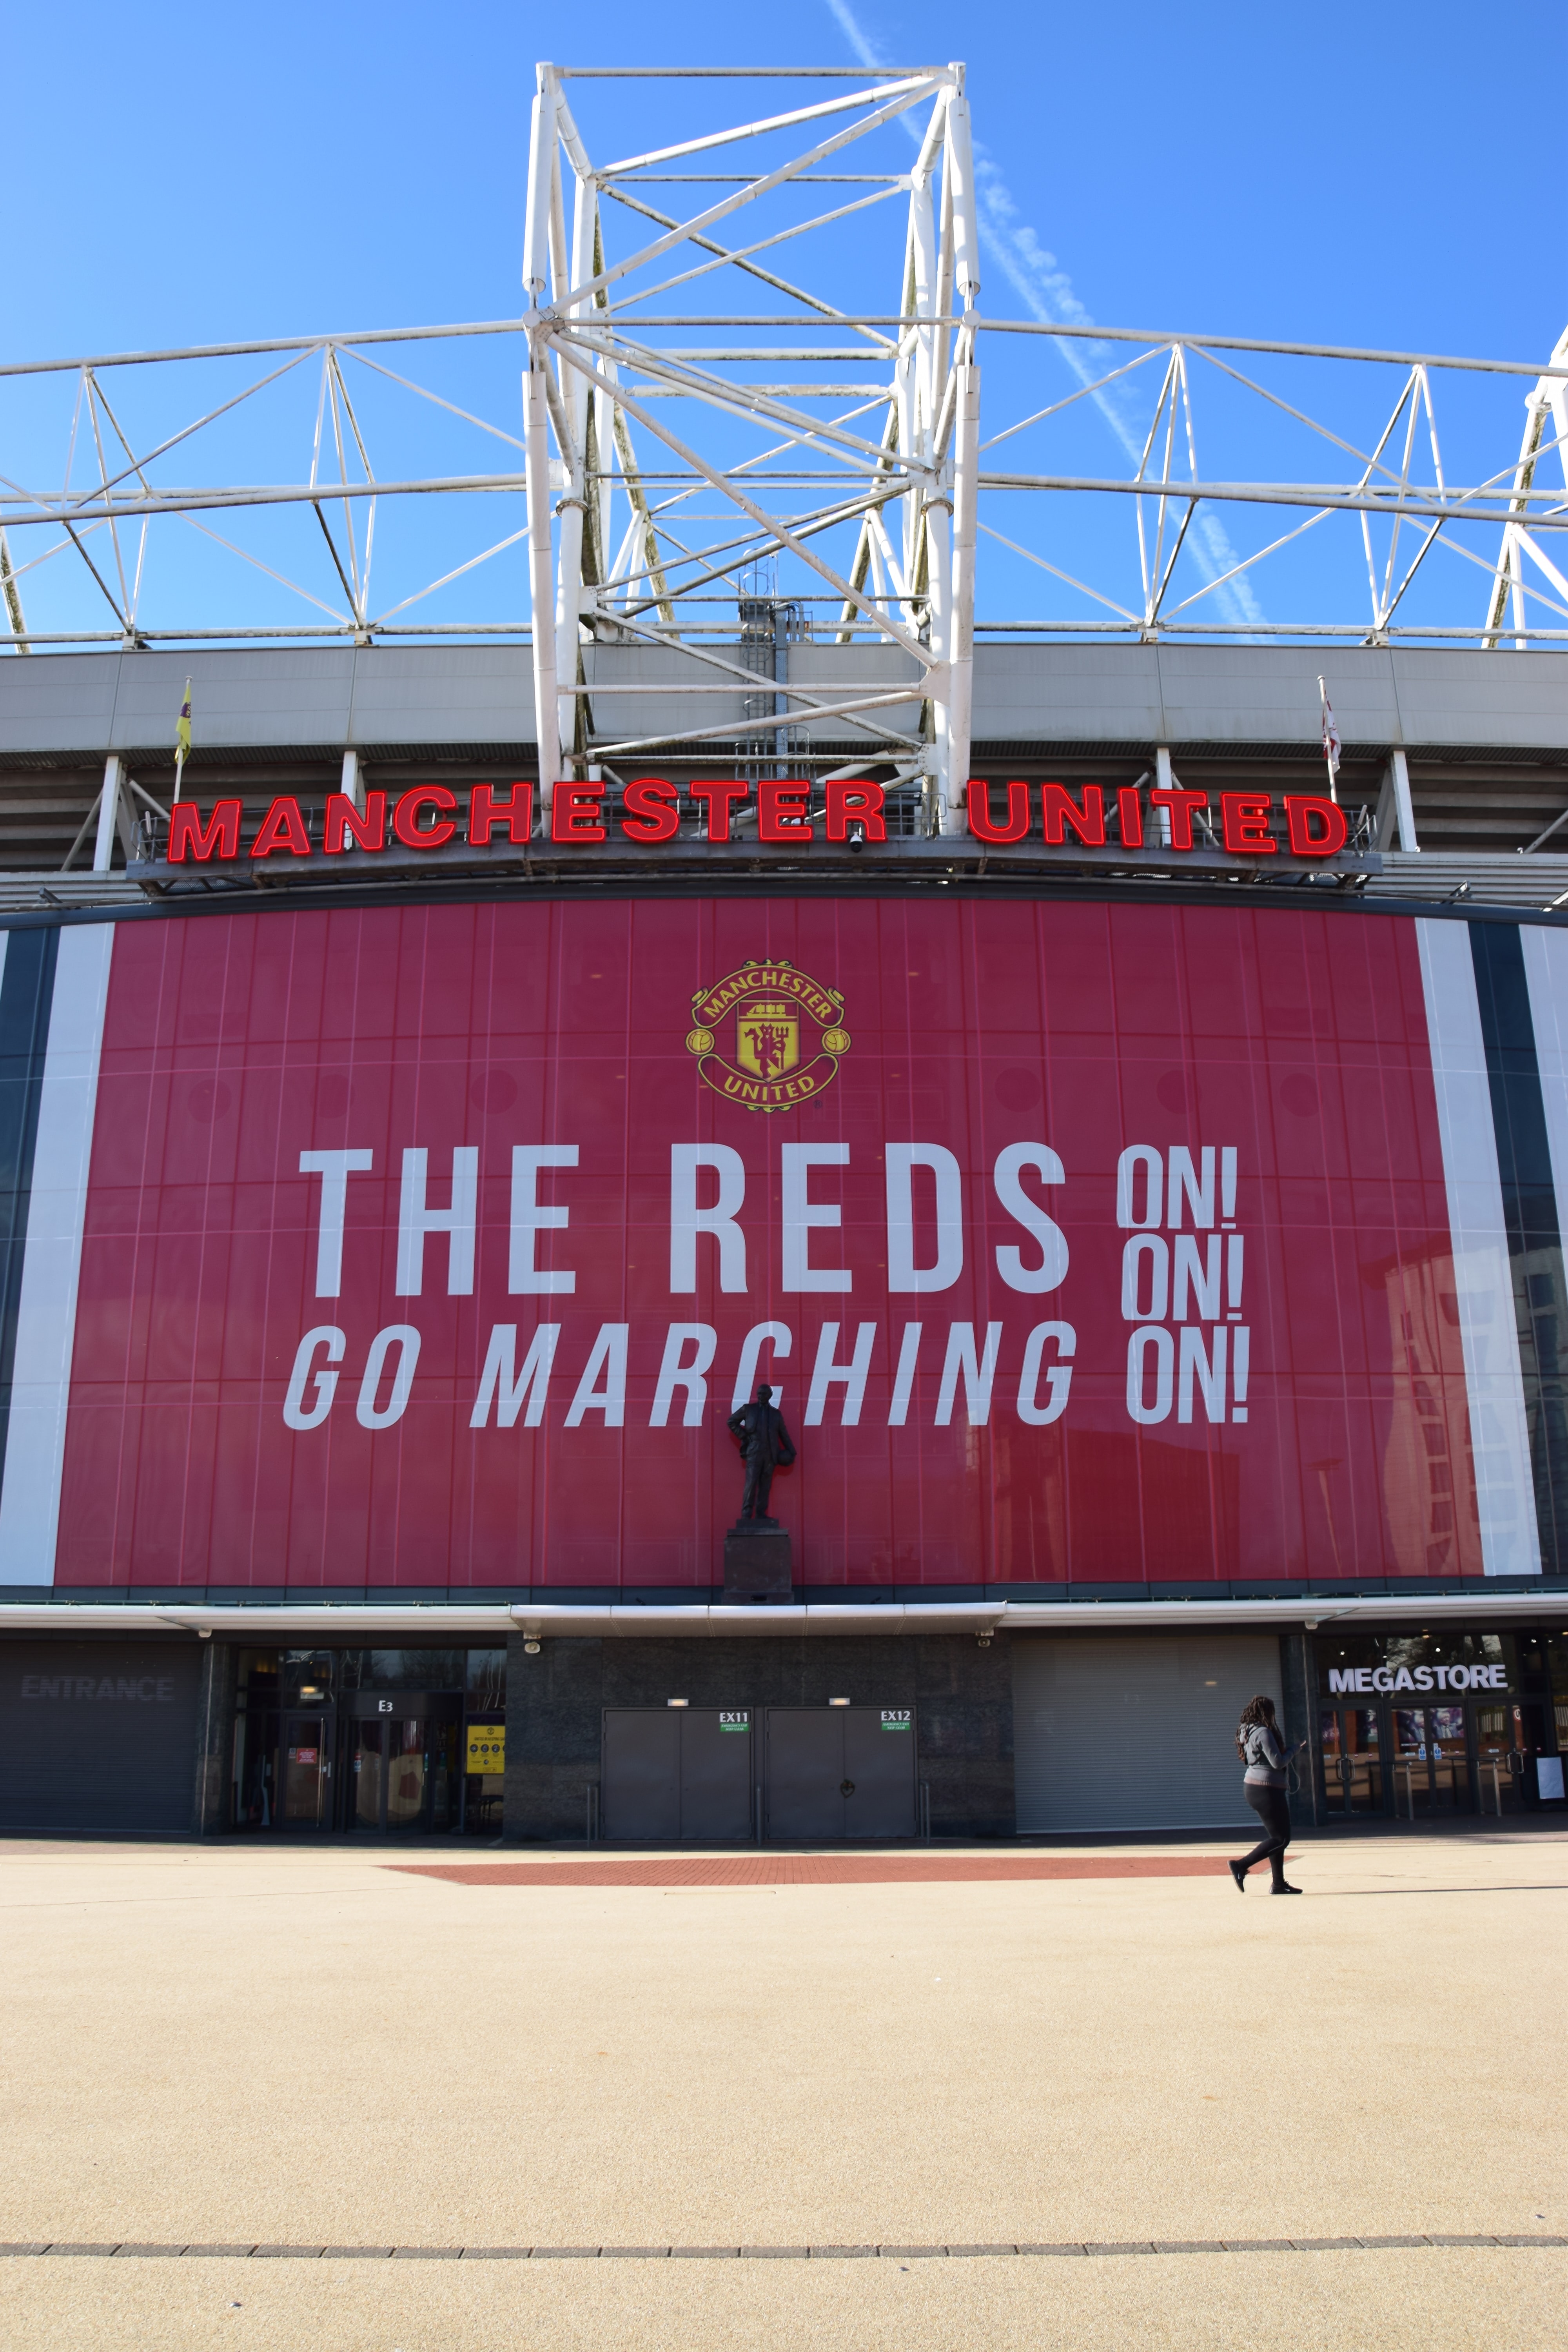 Old Trafford screen in the entrance of the stadium